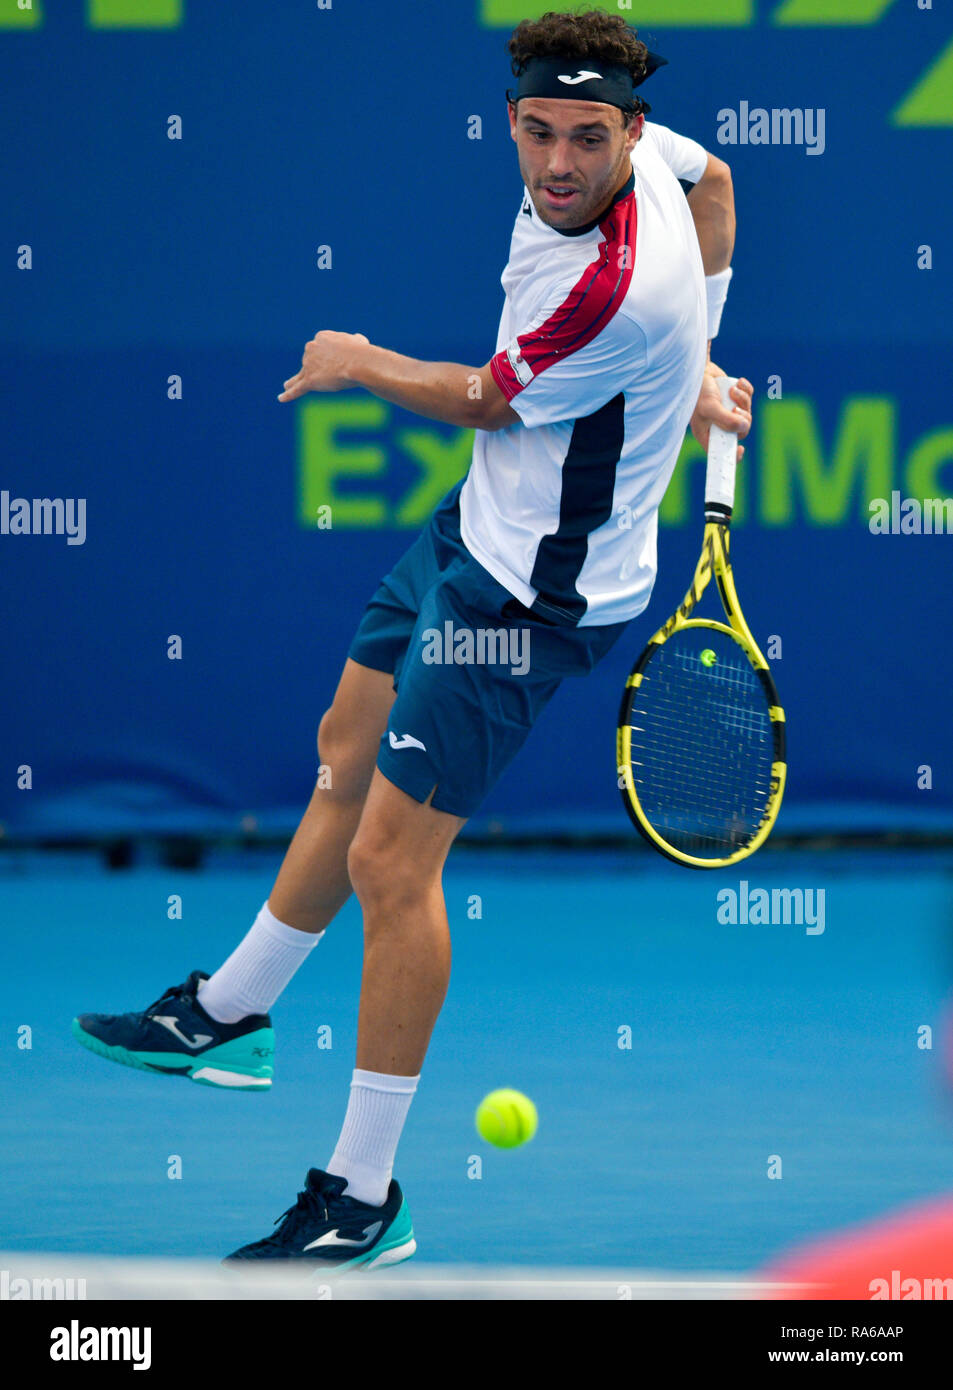 Doha, Qatar. 1st Jan, 2019. Marco Cecchinato of Italy returns the ball  during the first round match against Sergiy Stakhovsky of Ukraine at the  ATP Qatar Open Tennis match in Doha, capital